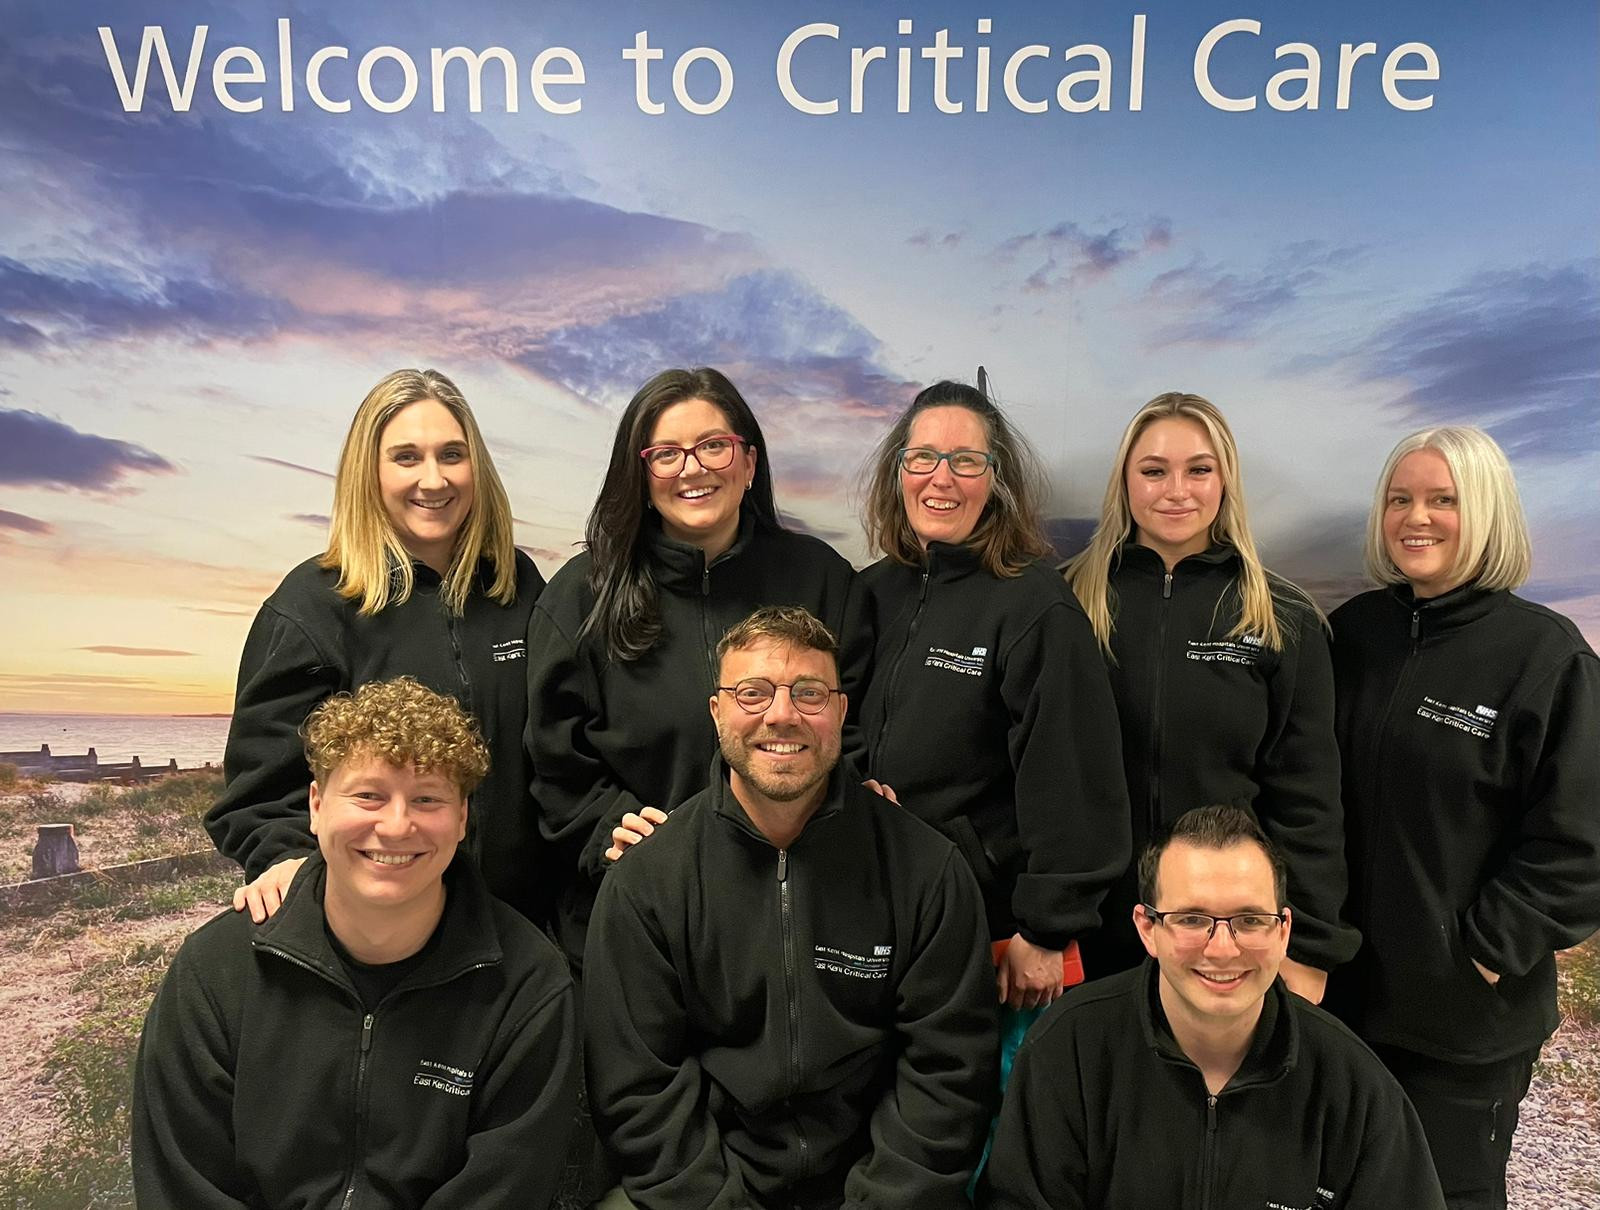 The team who will take on the 3 Peaks challenge, wearing black fleeces pictured in front of a Welcome to Critical Care sigh